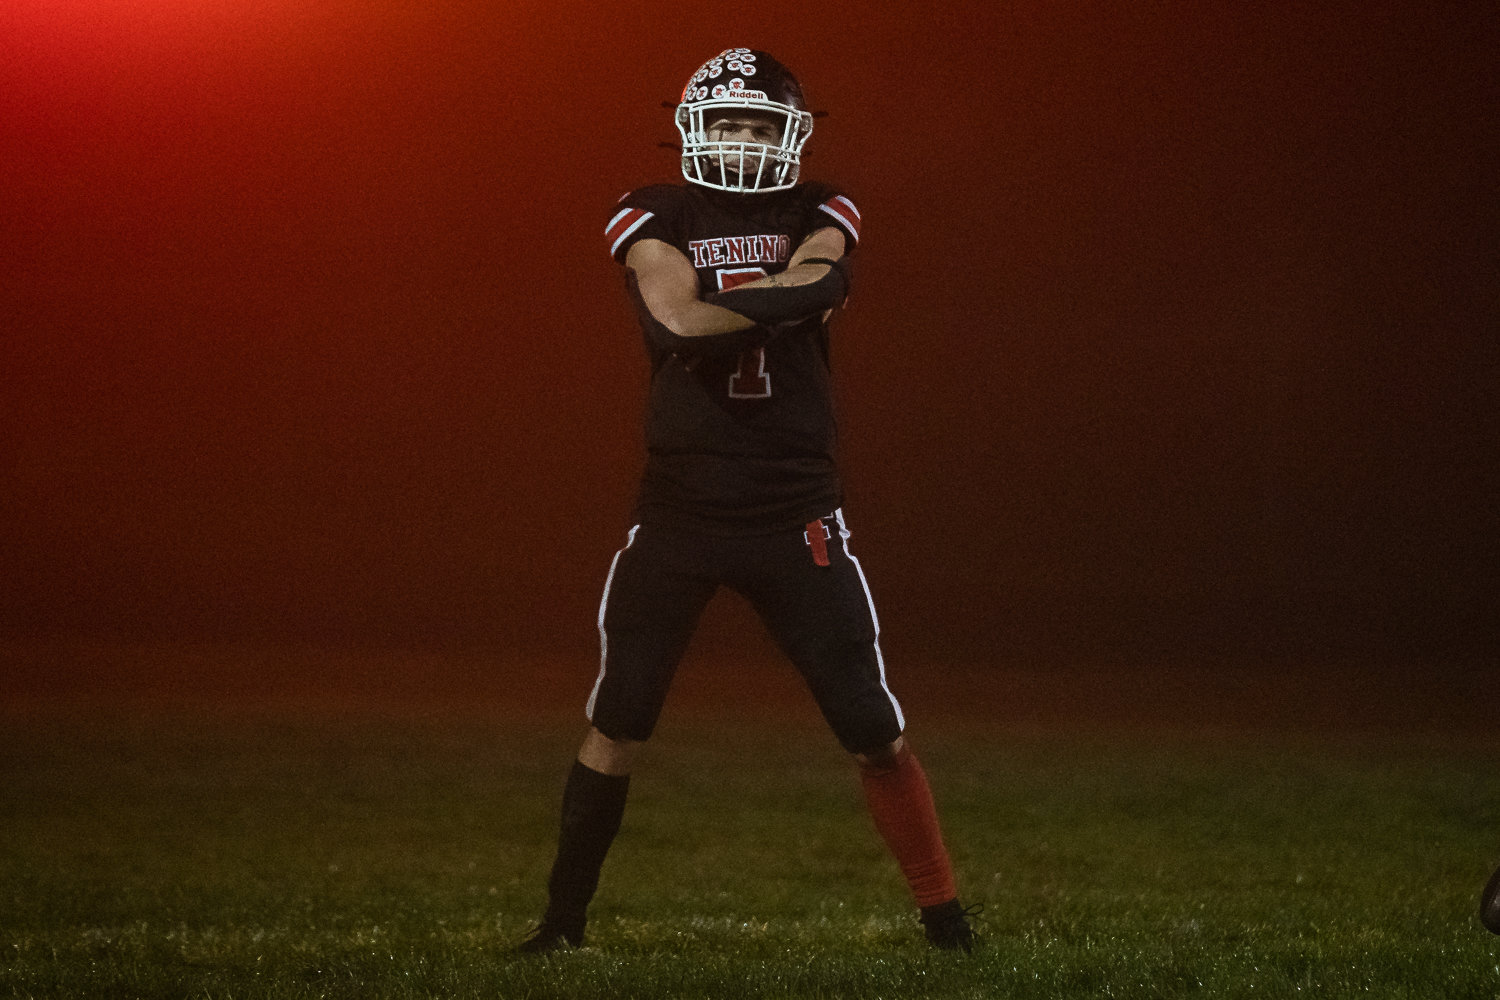 Tenino's Kysen Knox poses after scoring a touchdown against Rochester in the Scatter Creek Showdown Oct. 28.